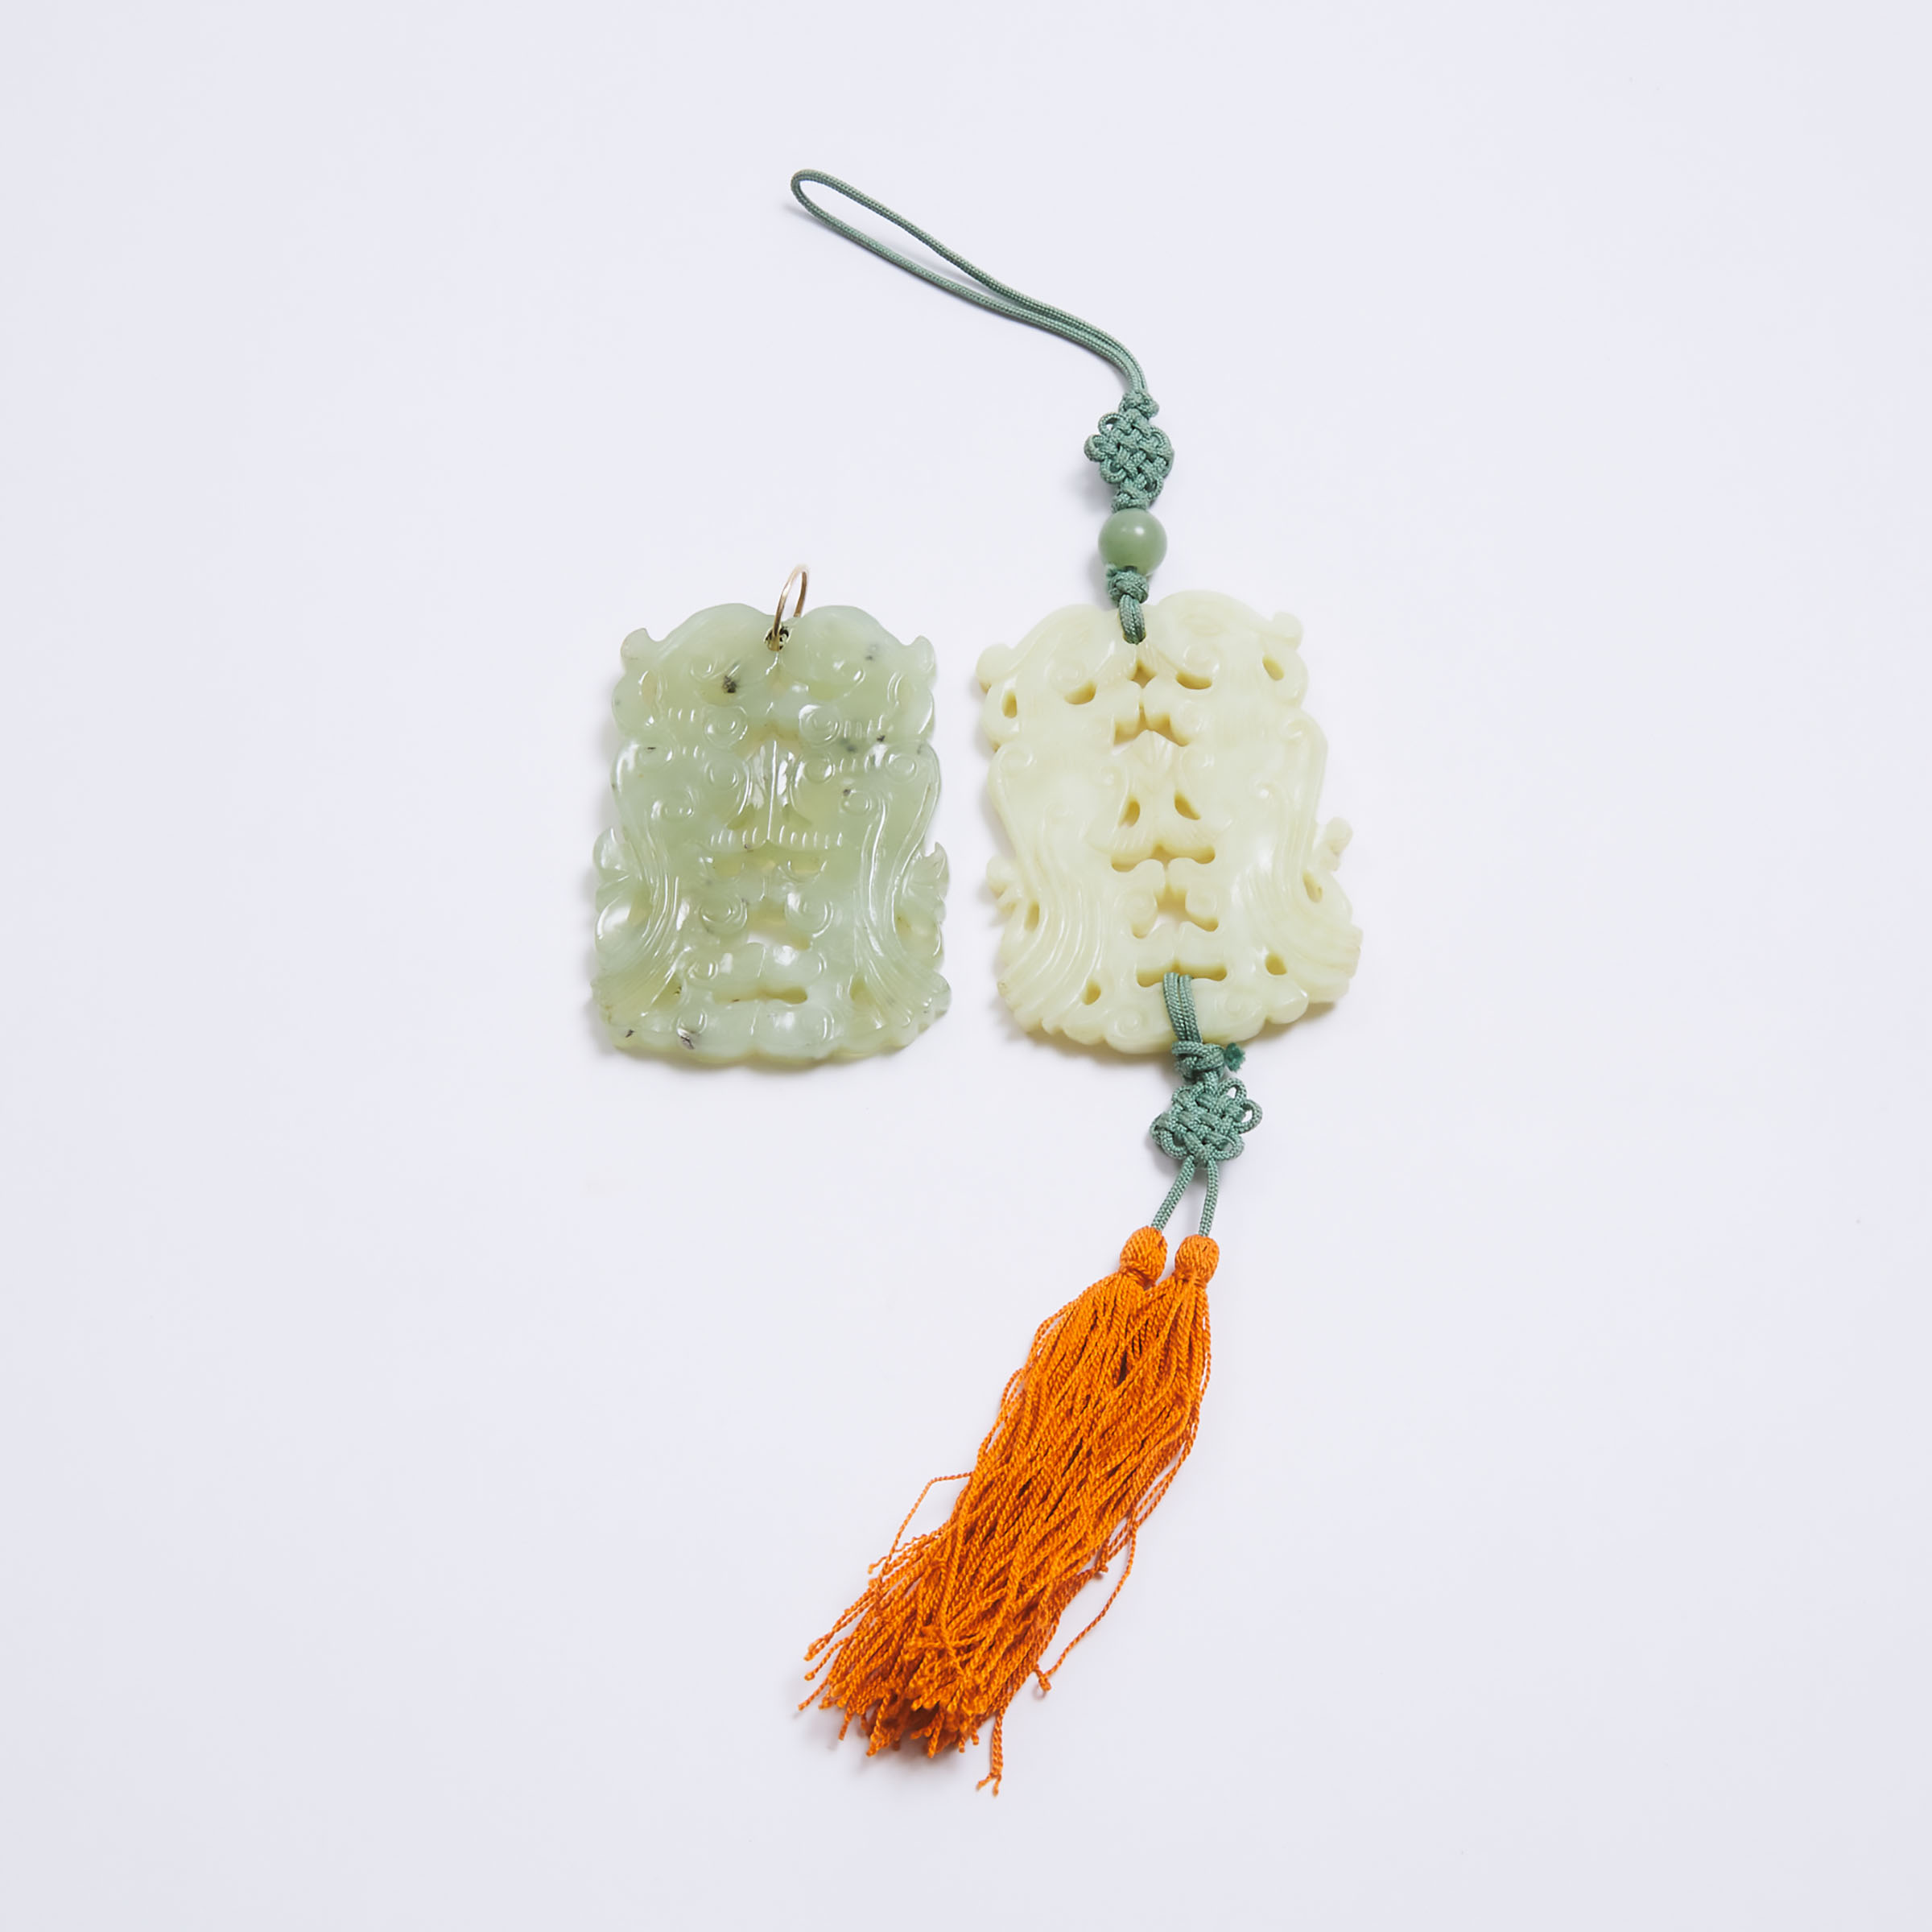 Two Reticulated Jade 'Double Phoenix' Pendants, Early to Mid 20th Century, 民国 双凤纹玉佩一组两件, length 2.3 - Image 2 of 2